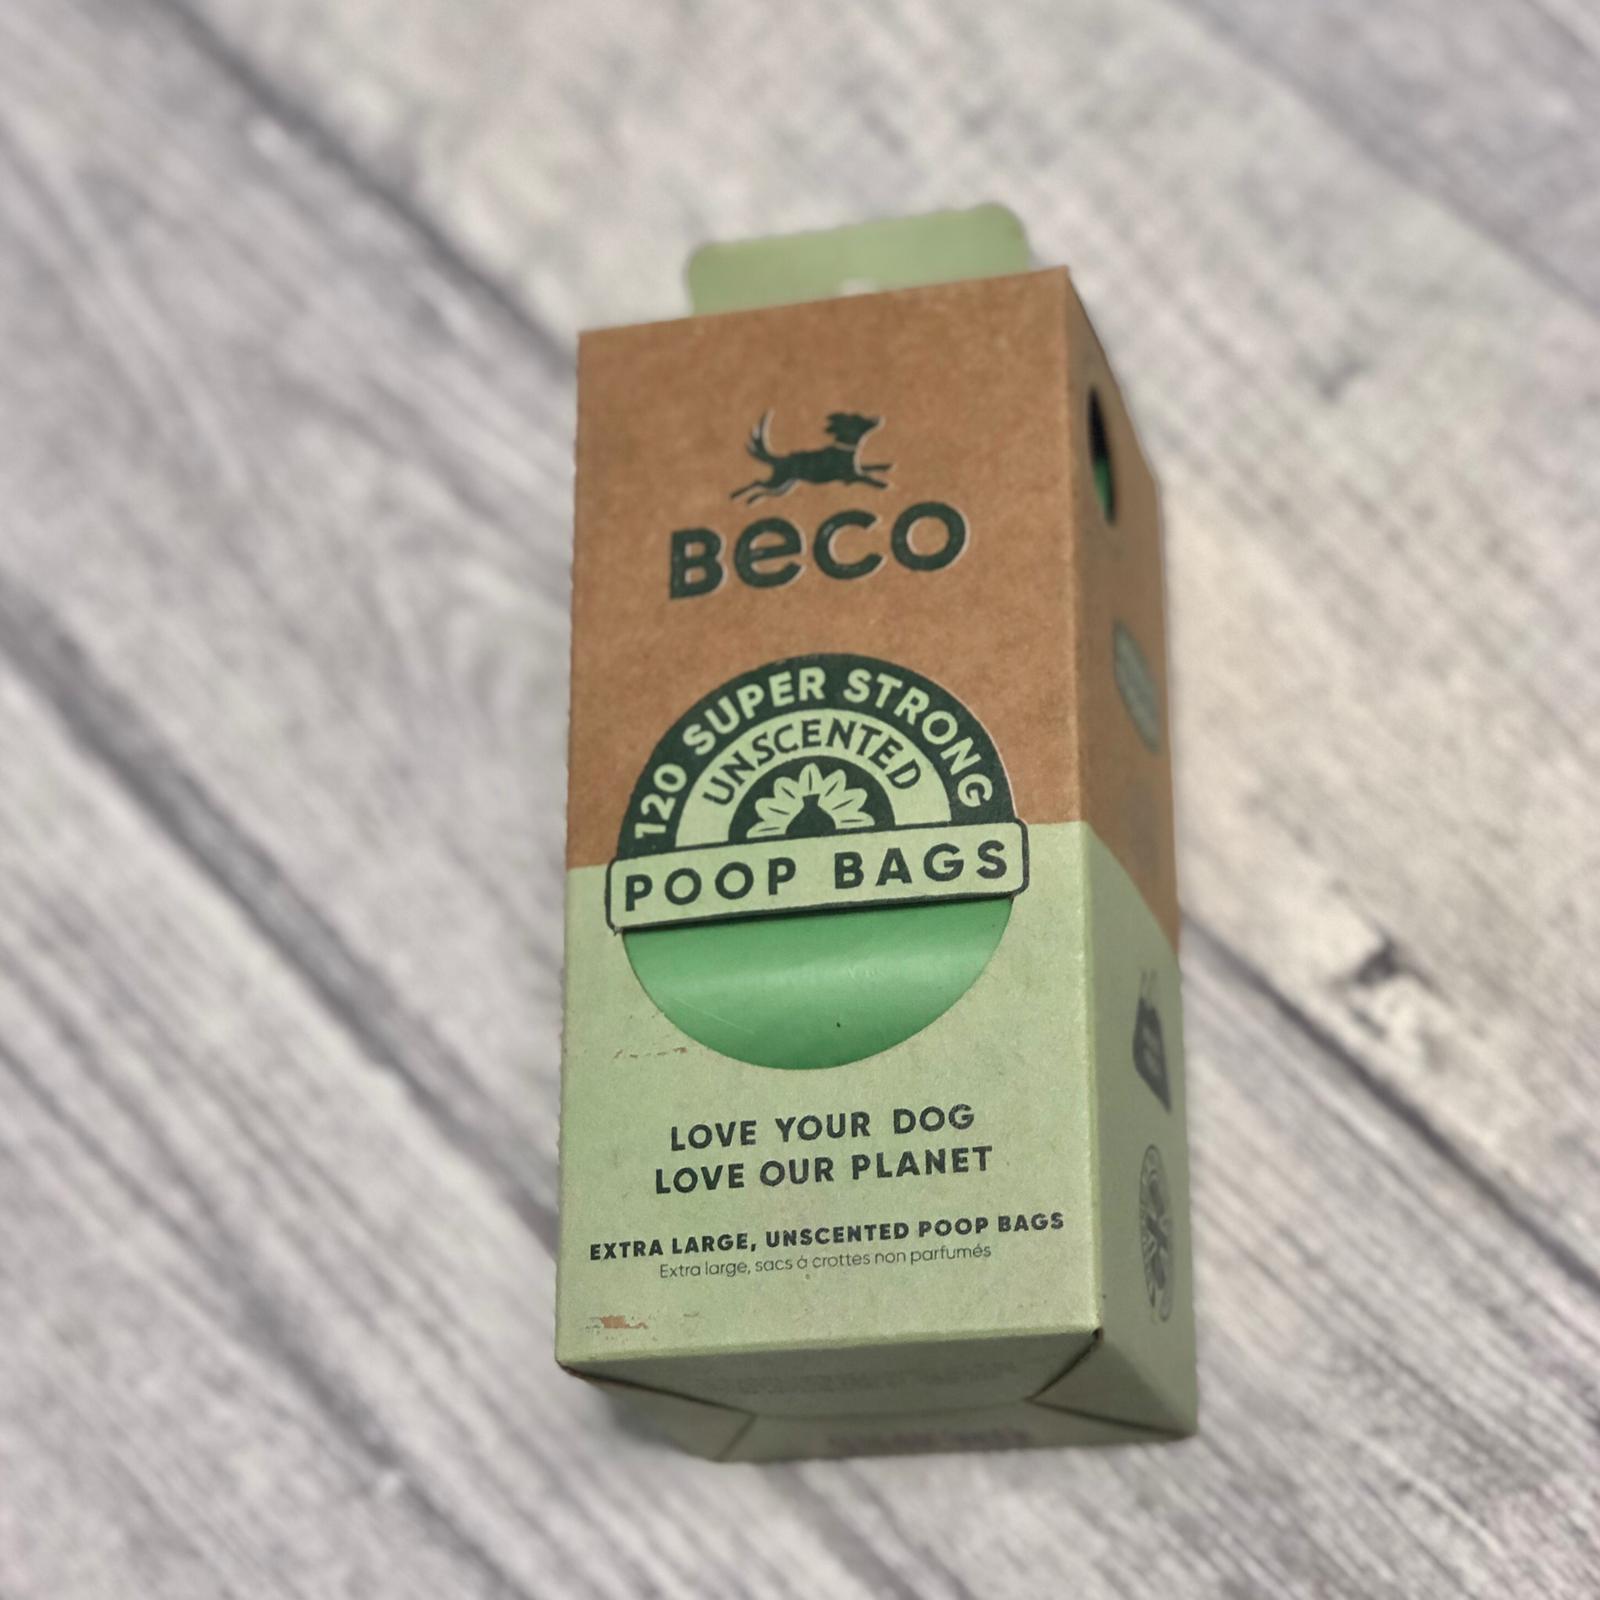 120 Unscented Beco Poop Bags